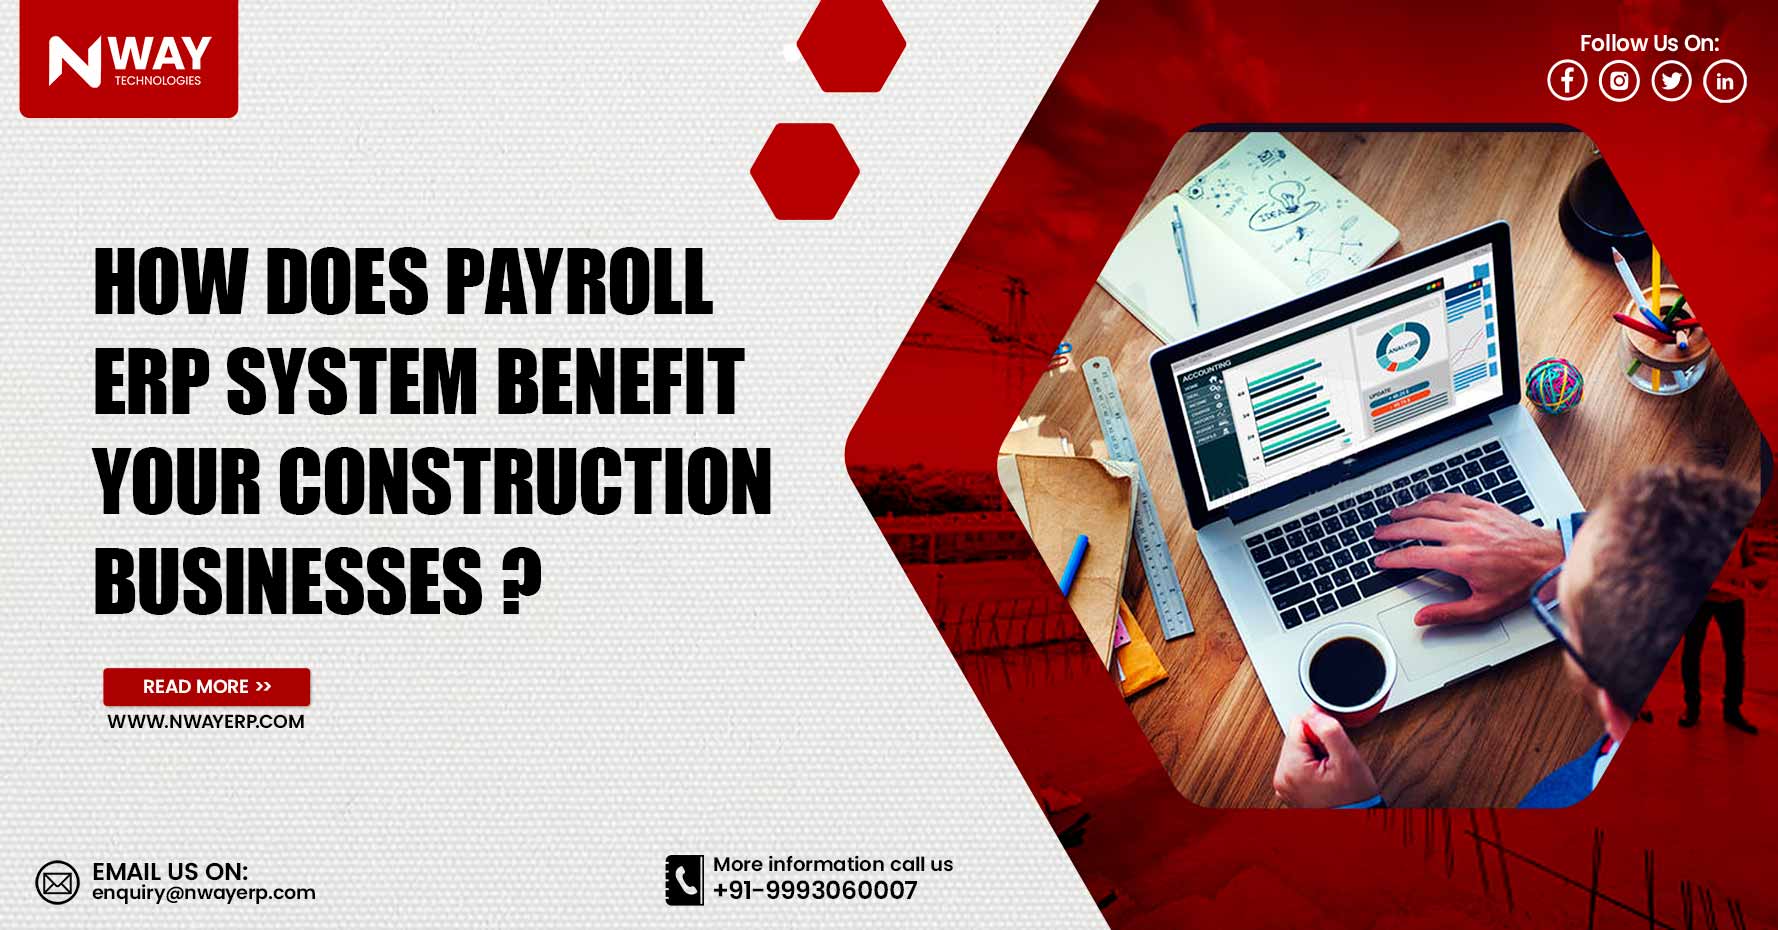 How Does Payroll ERP System Benefit Your Construction Business?